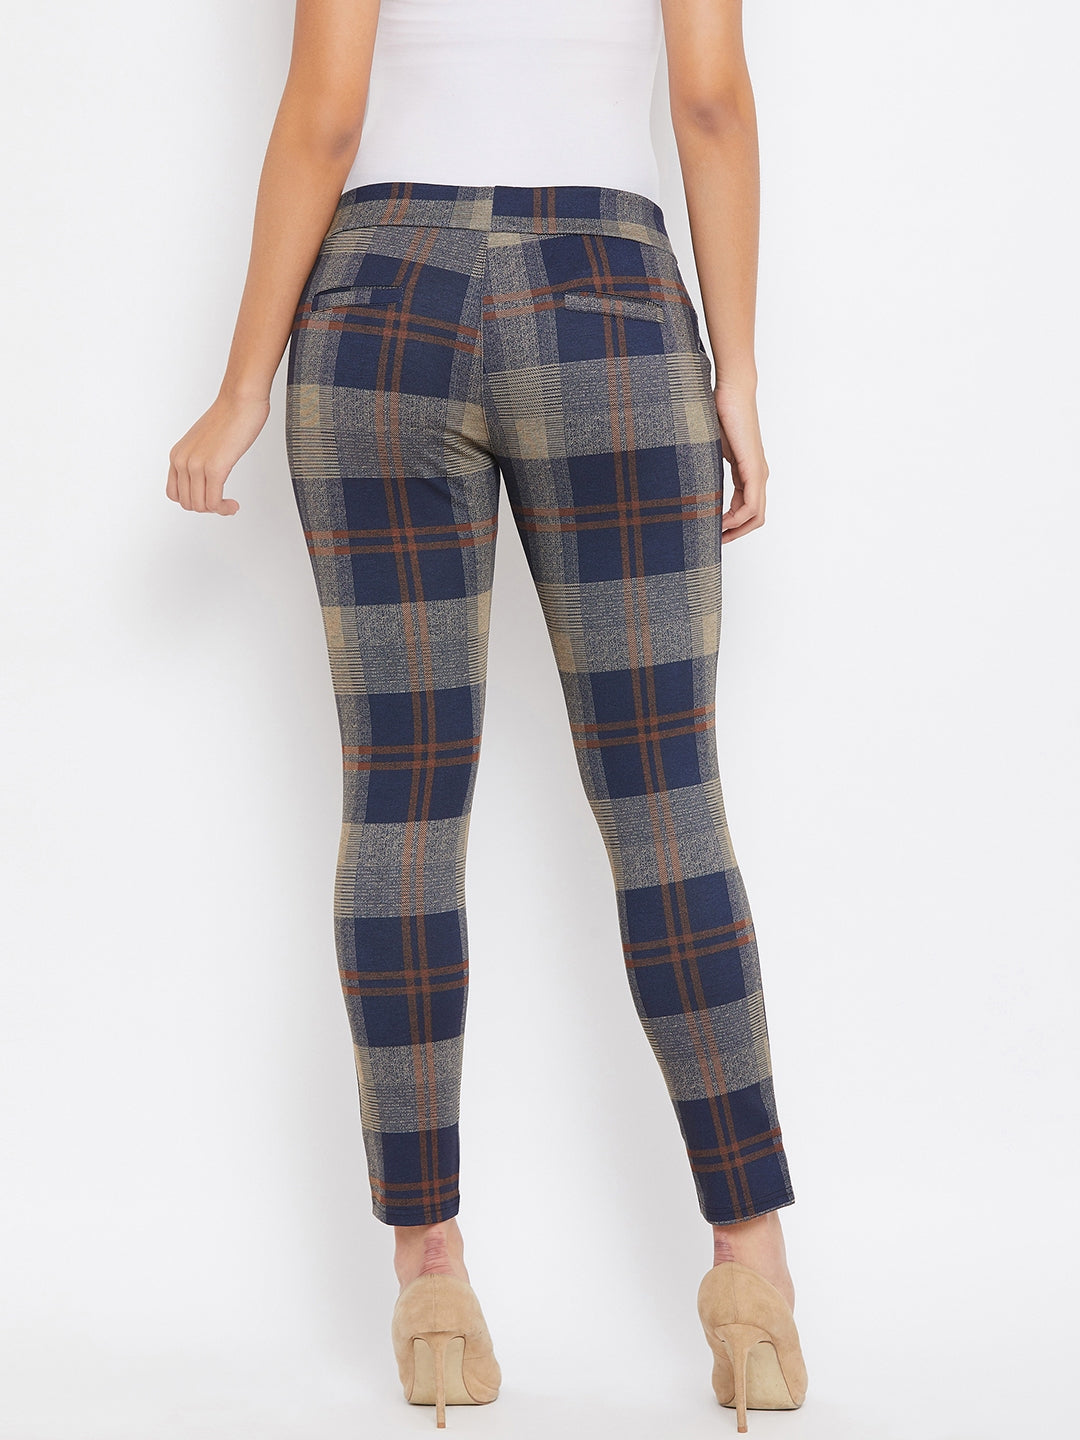 Plaid Checked Skinnyfit Pants - Women Trousers